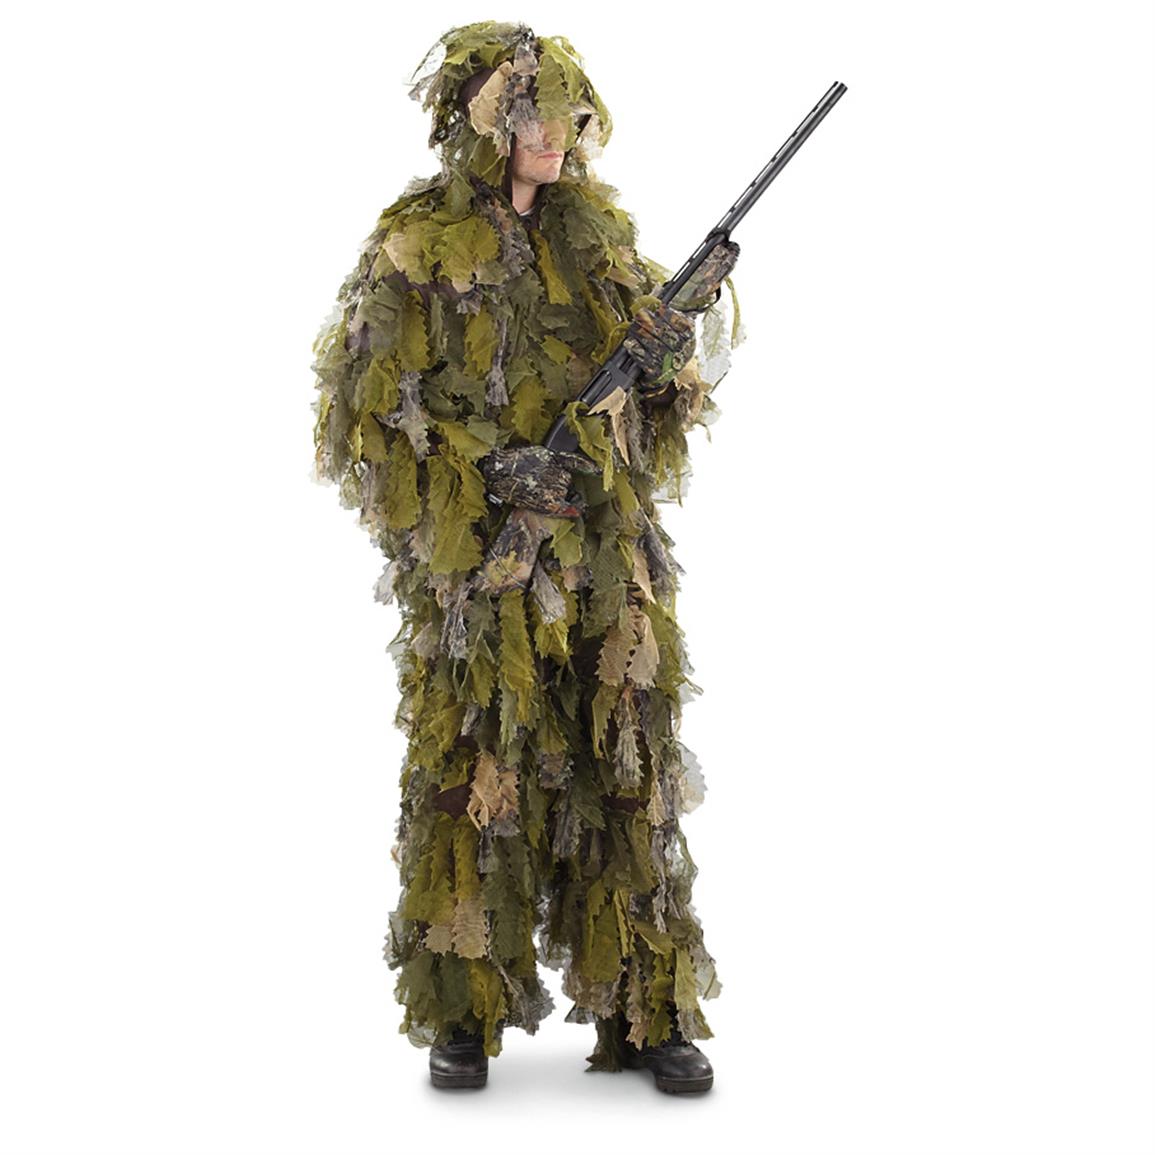 Red Rock Outdoor Gear™ Big Game Ghillie Suit - 612845, Tactical ...